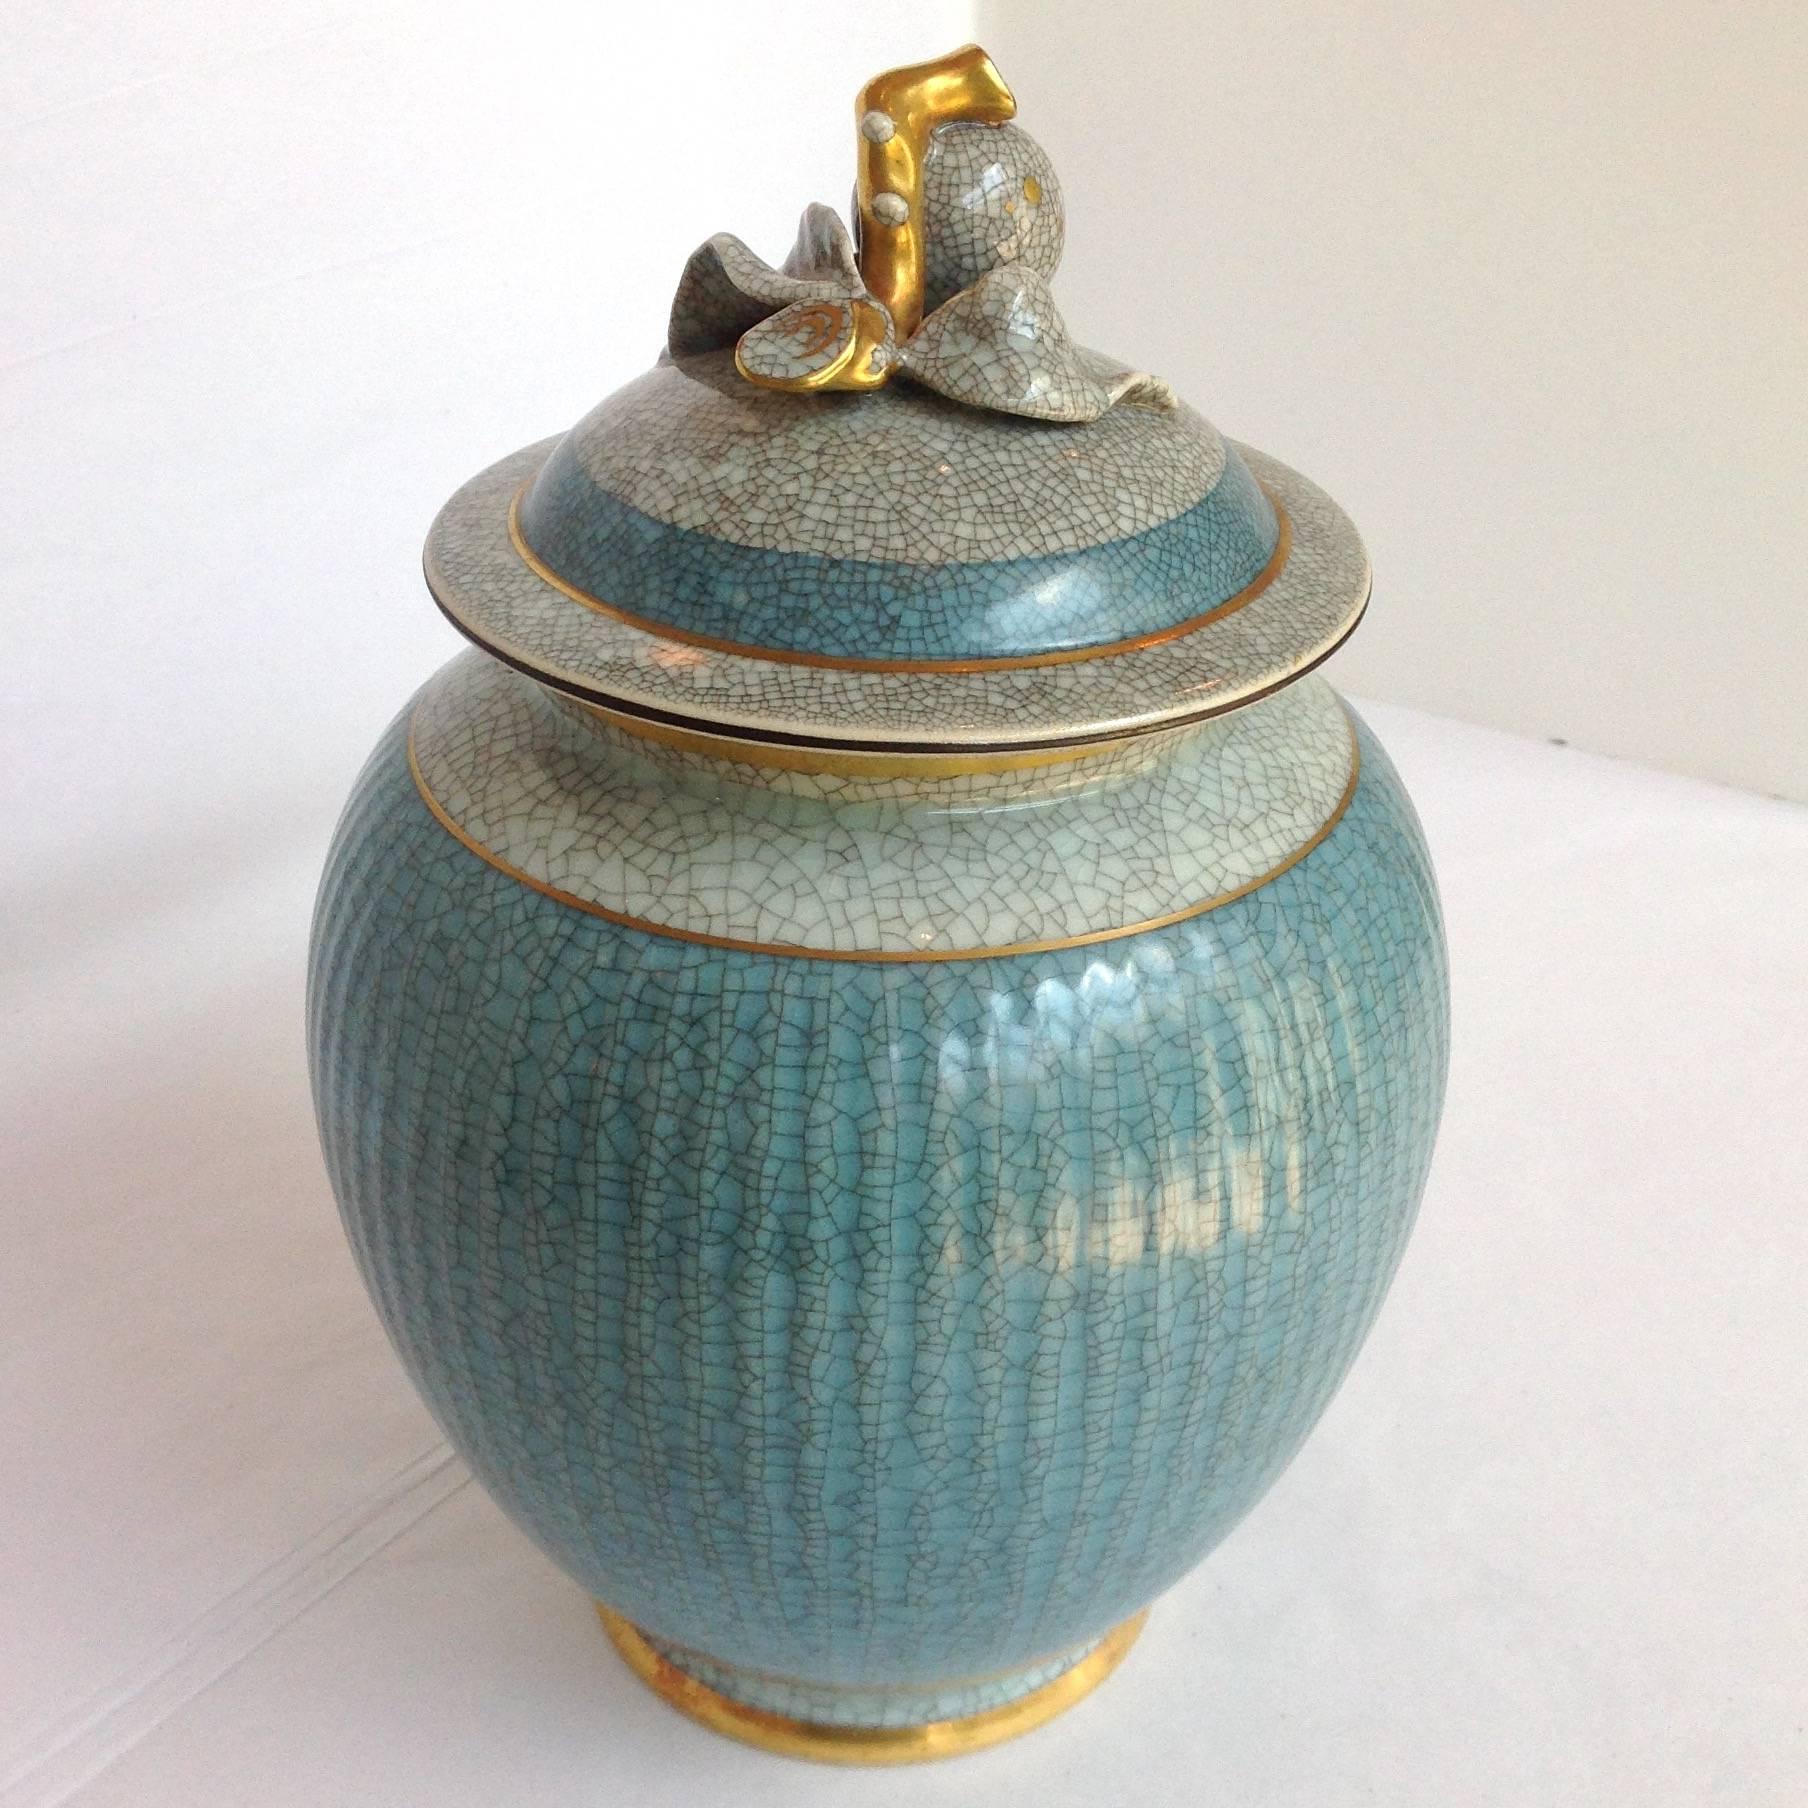 Large Royal Copenhagen ceramic vase by designer Thorkild Olsen in aqua and white with a craquellure glaze with gold trim. Made in Denmark circa 1940s.